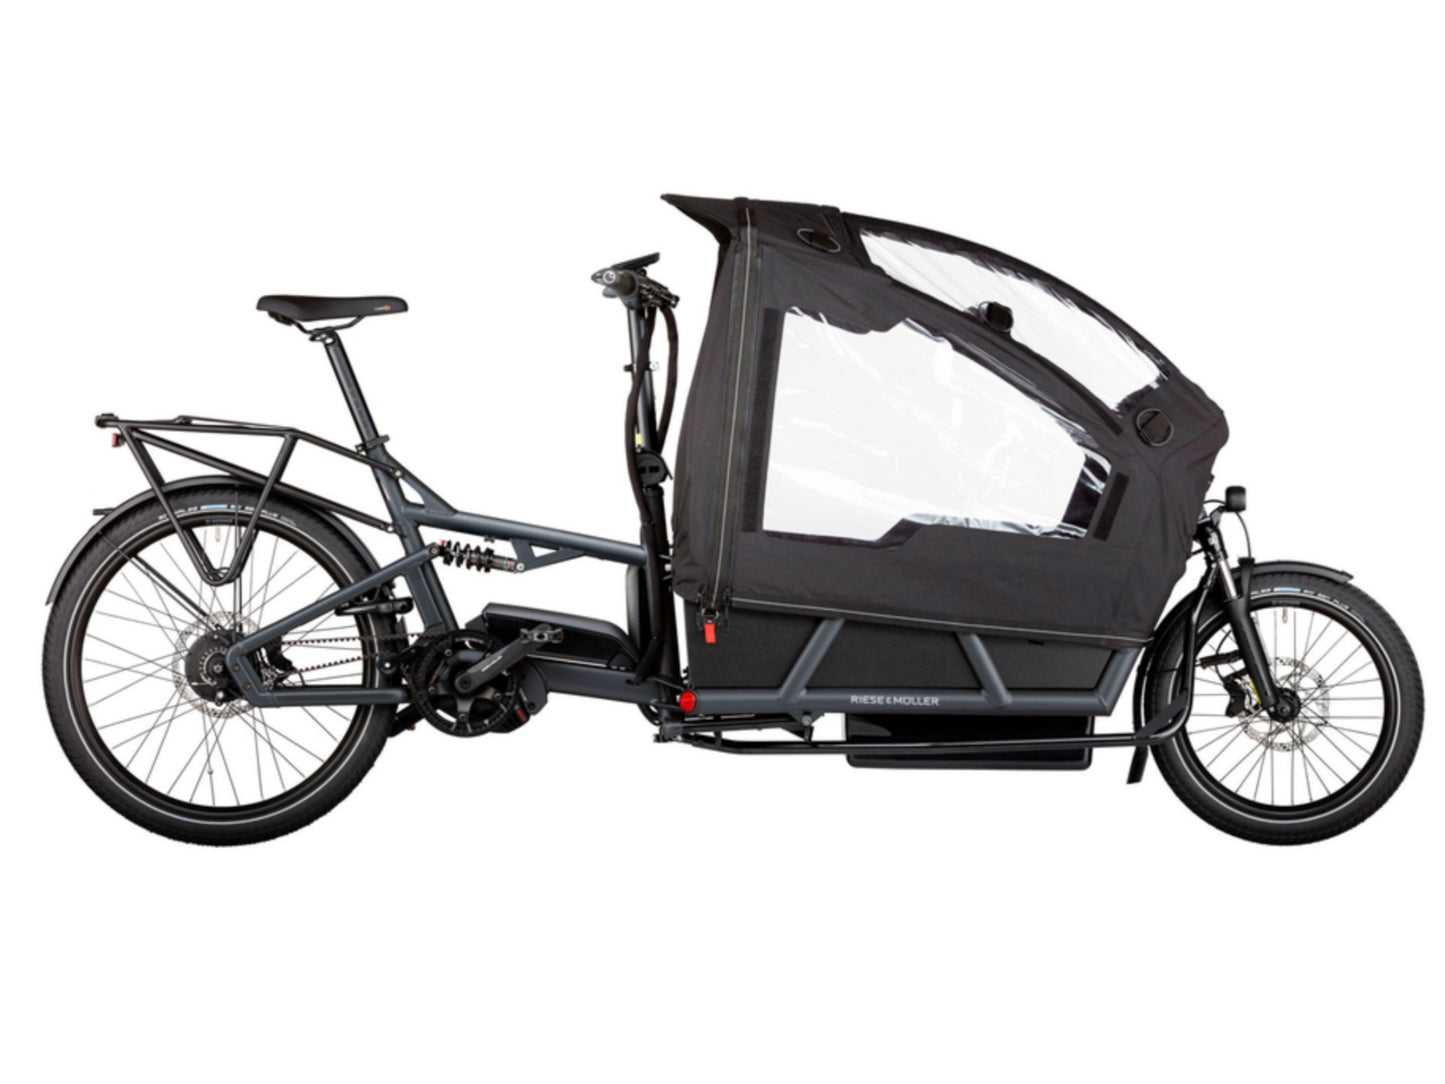 Riese and Muller Load 75 Rohloff HS eMTB full suspension Nyon Dual Battery carrier low sidewalls three child seats child cover options